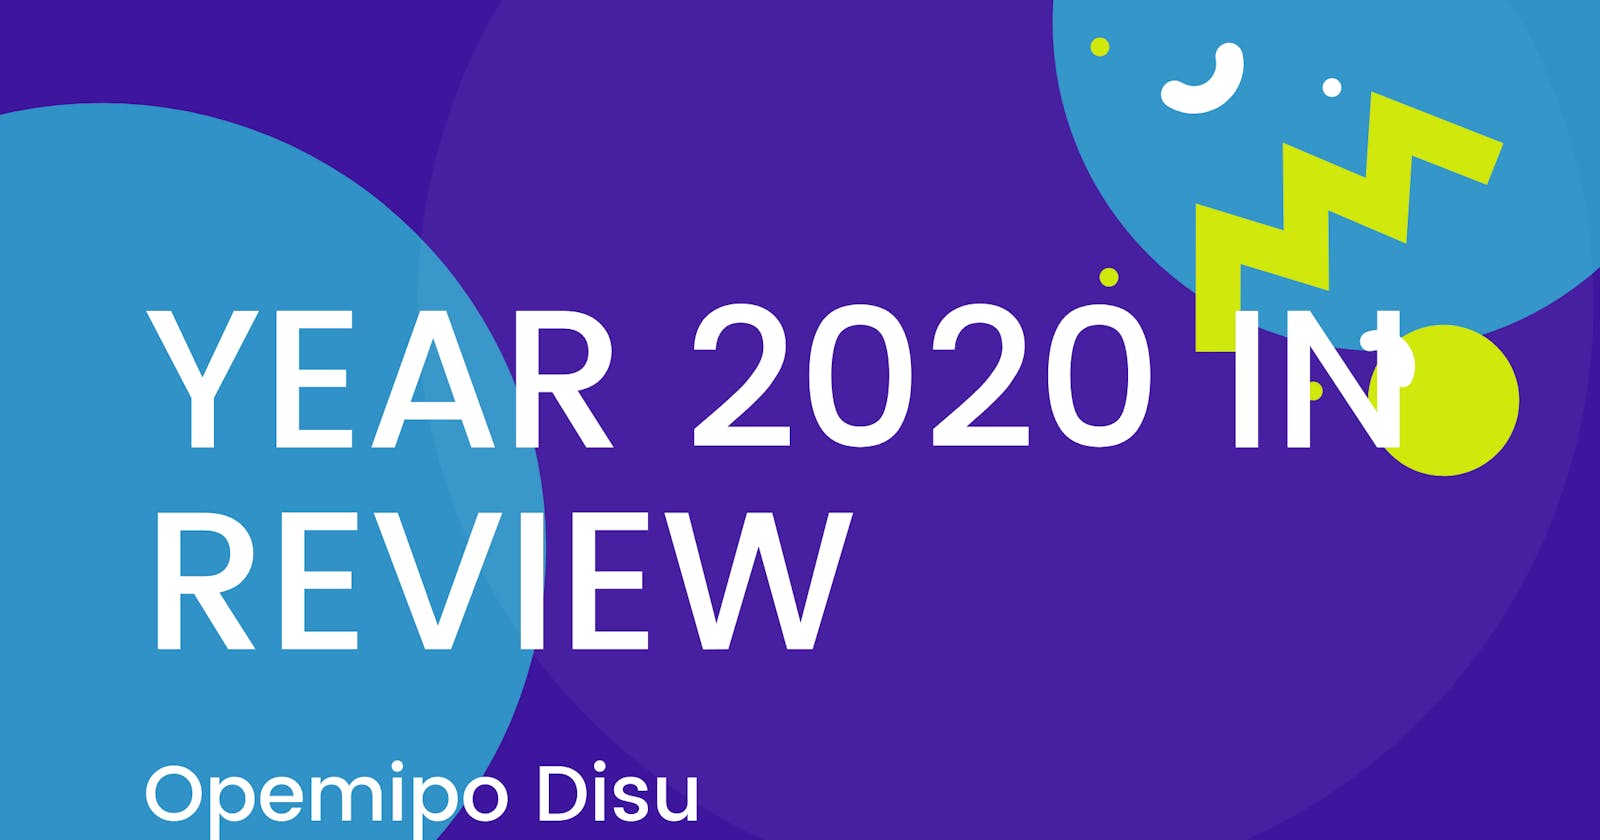 Year 2020 In Review